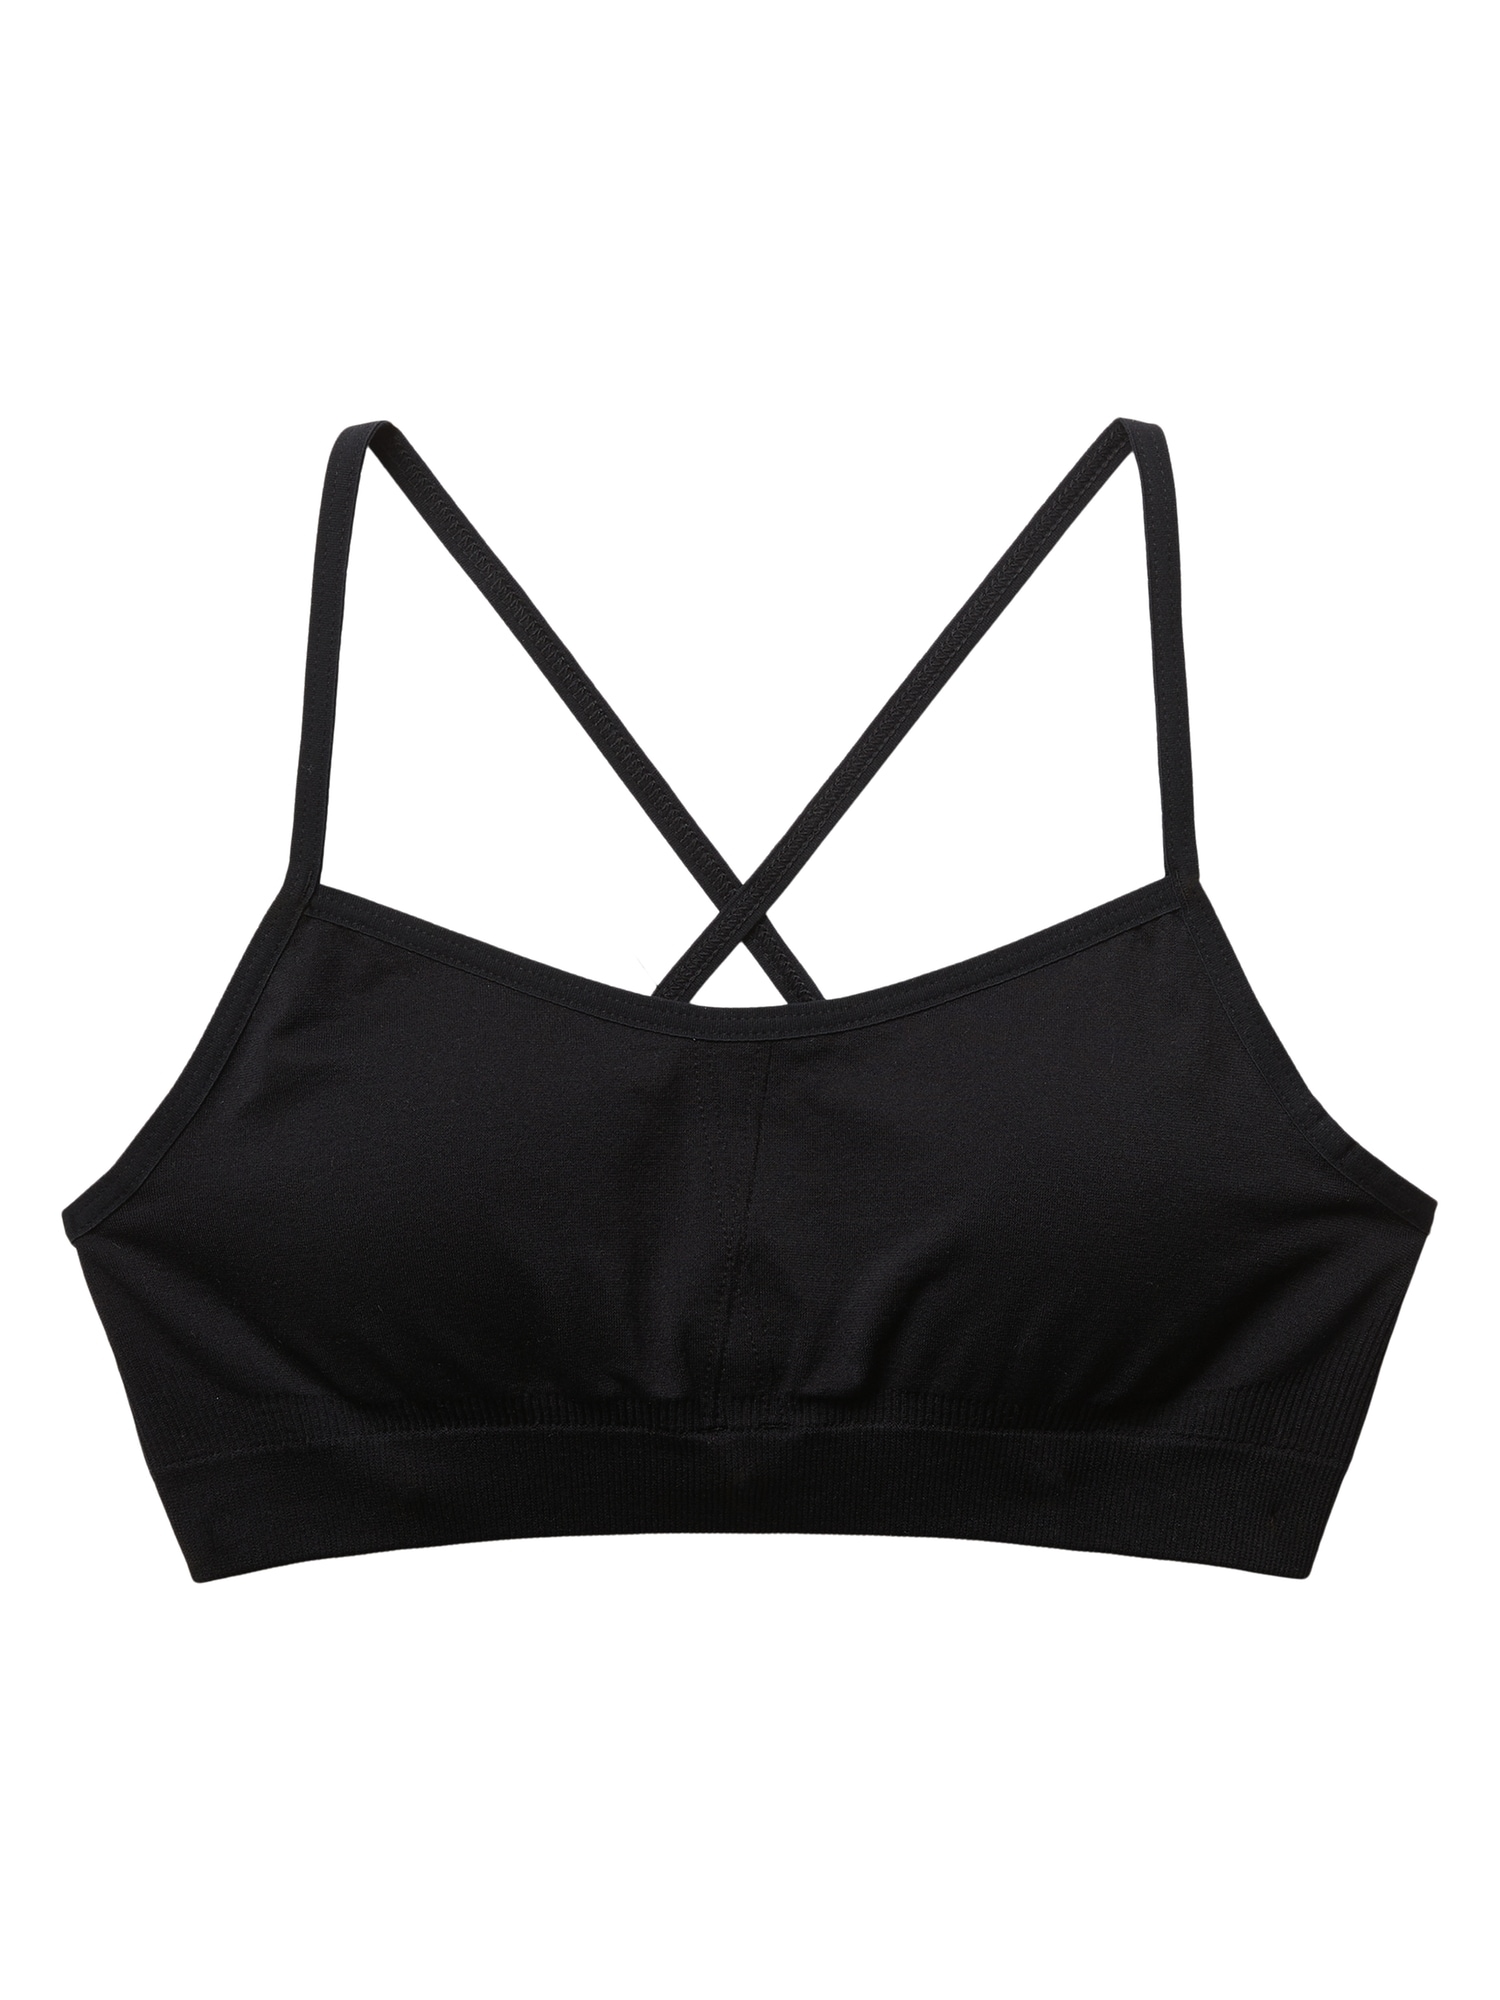 Galaxy Ribbed Seamless Spandex Avia Sports Bra Elastic, Breathable, And  Breast Enhancement For Womens Fitness And Sports Underwear Model: 230814  From Linjun05, $15.54